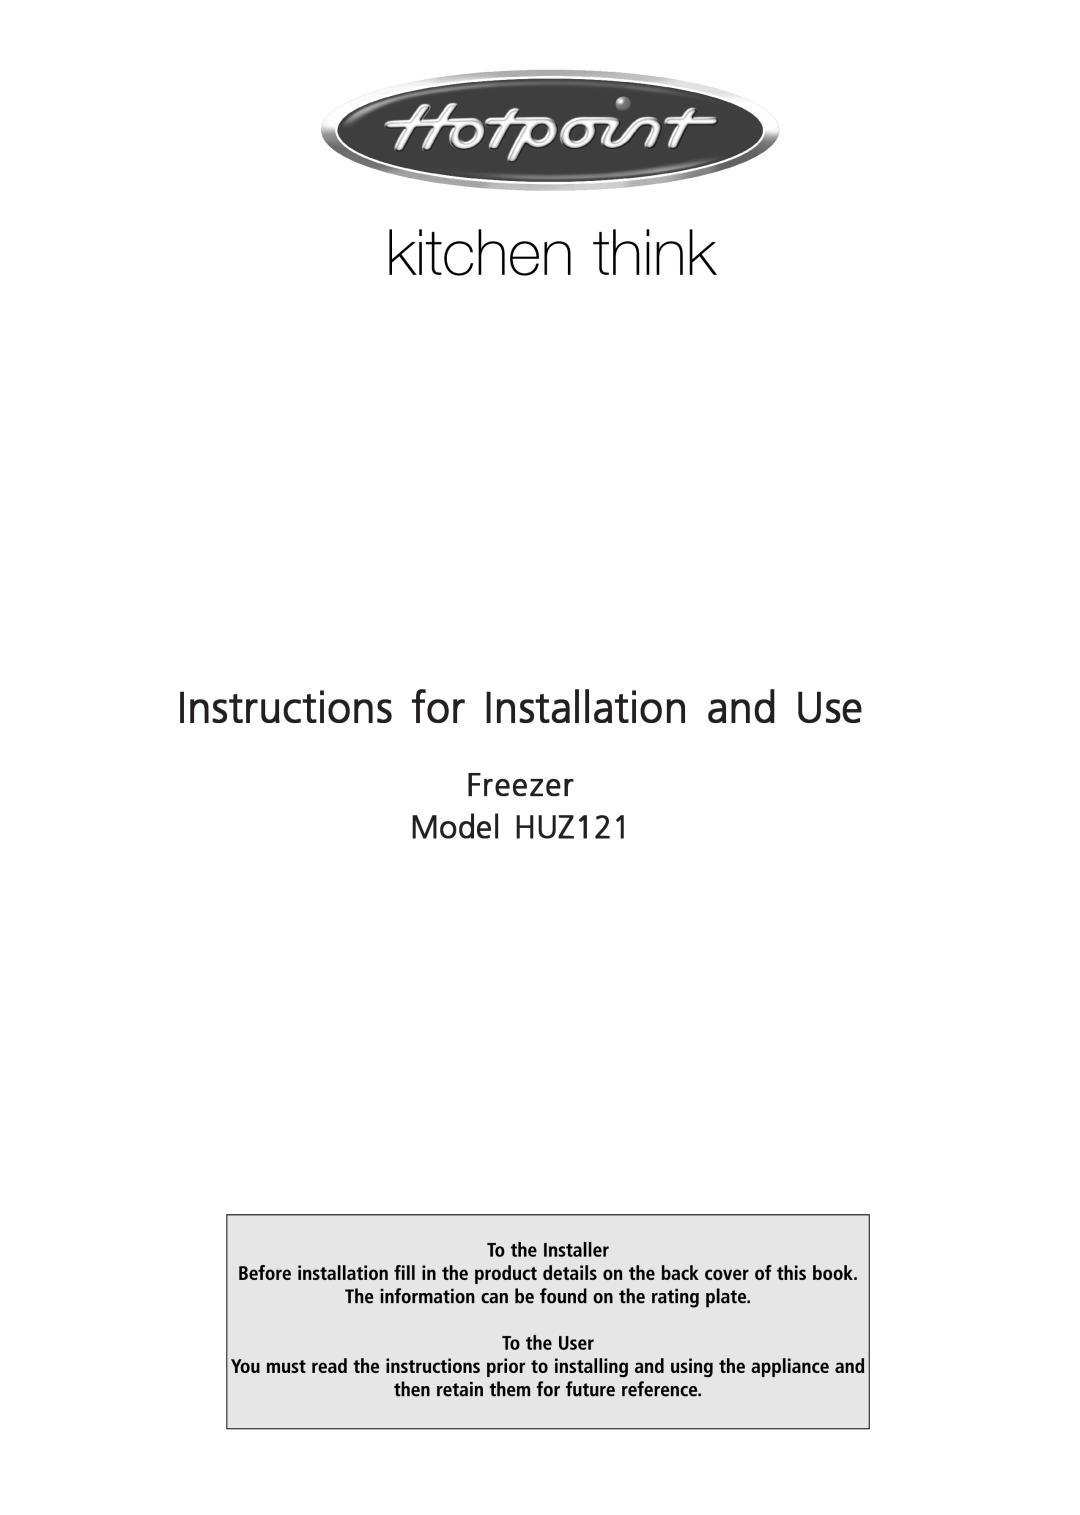 Hotpoint manual Freezer Model HUZ121, Instructions for Installation and Use 